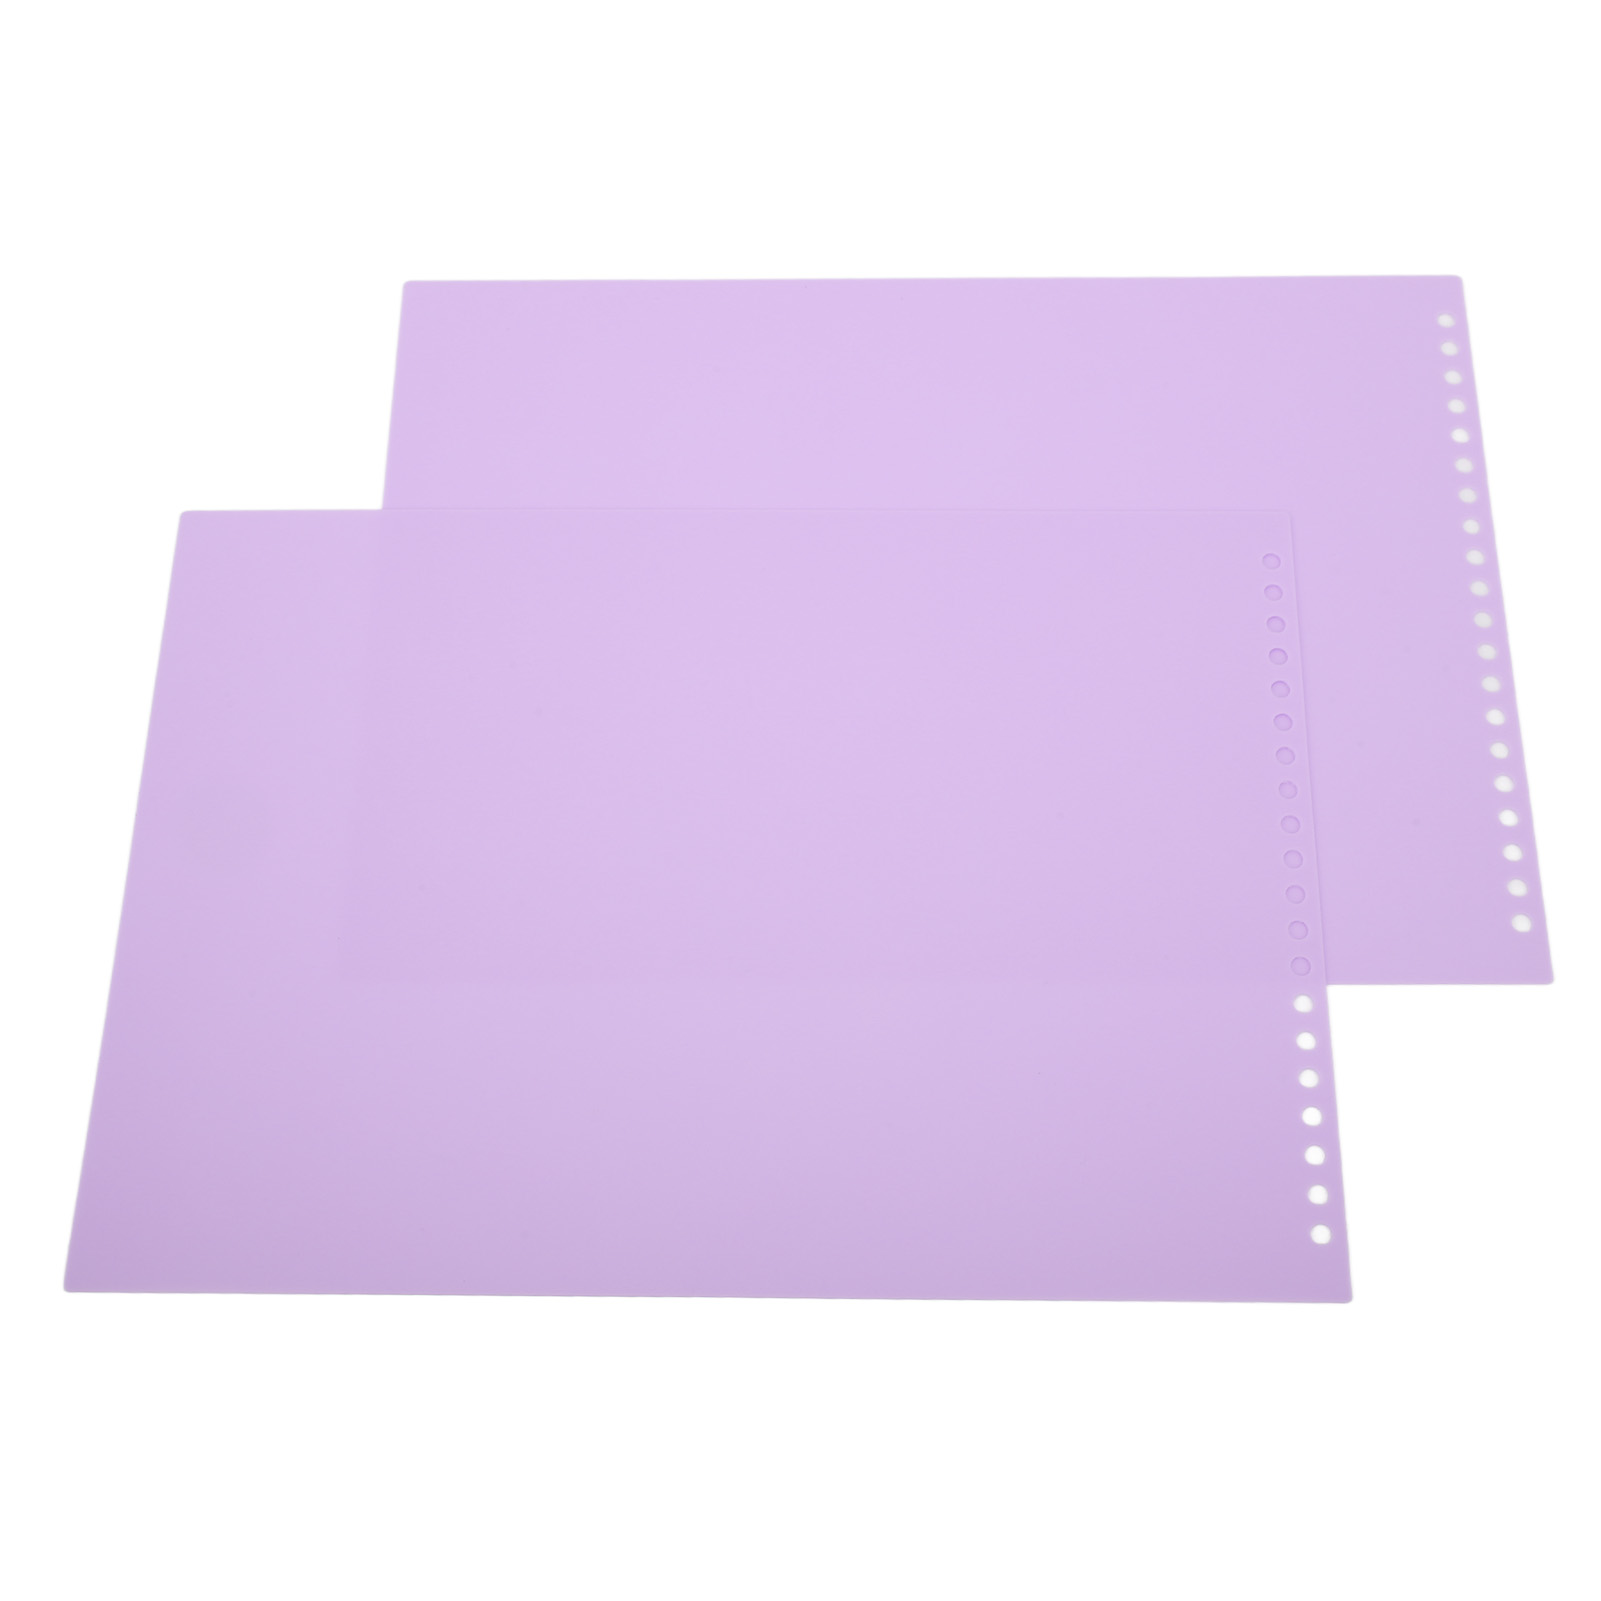 YLSHRF 20Pcs Sheet Protectors A4 20 Holes Colored Detachable Frosted Paper  Covers Thin Rollable Waterproof Binding Covers,Paper Protector Sheets 